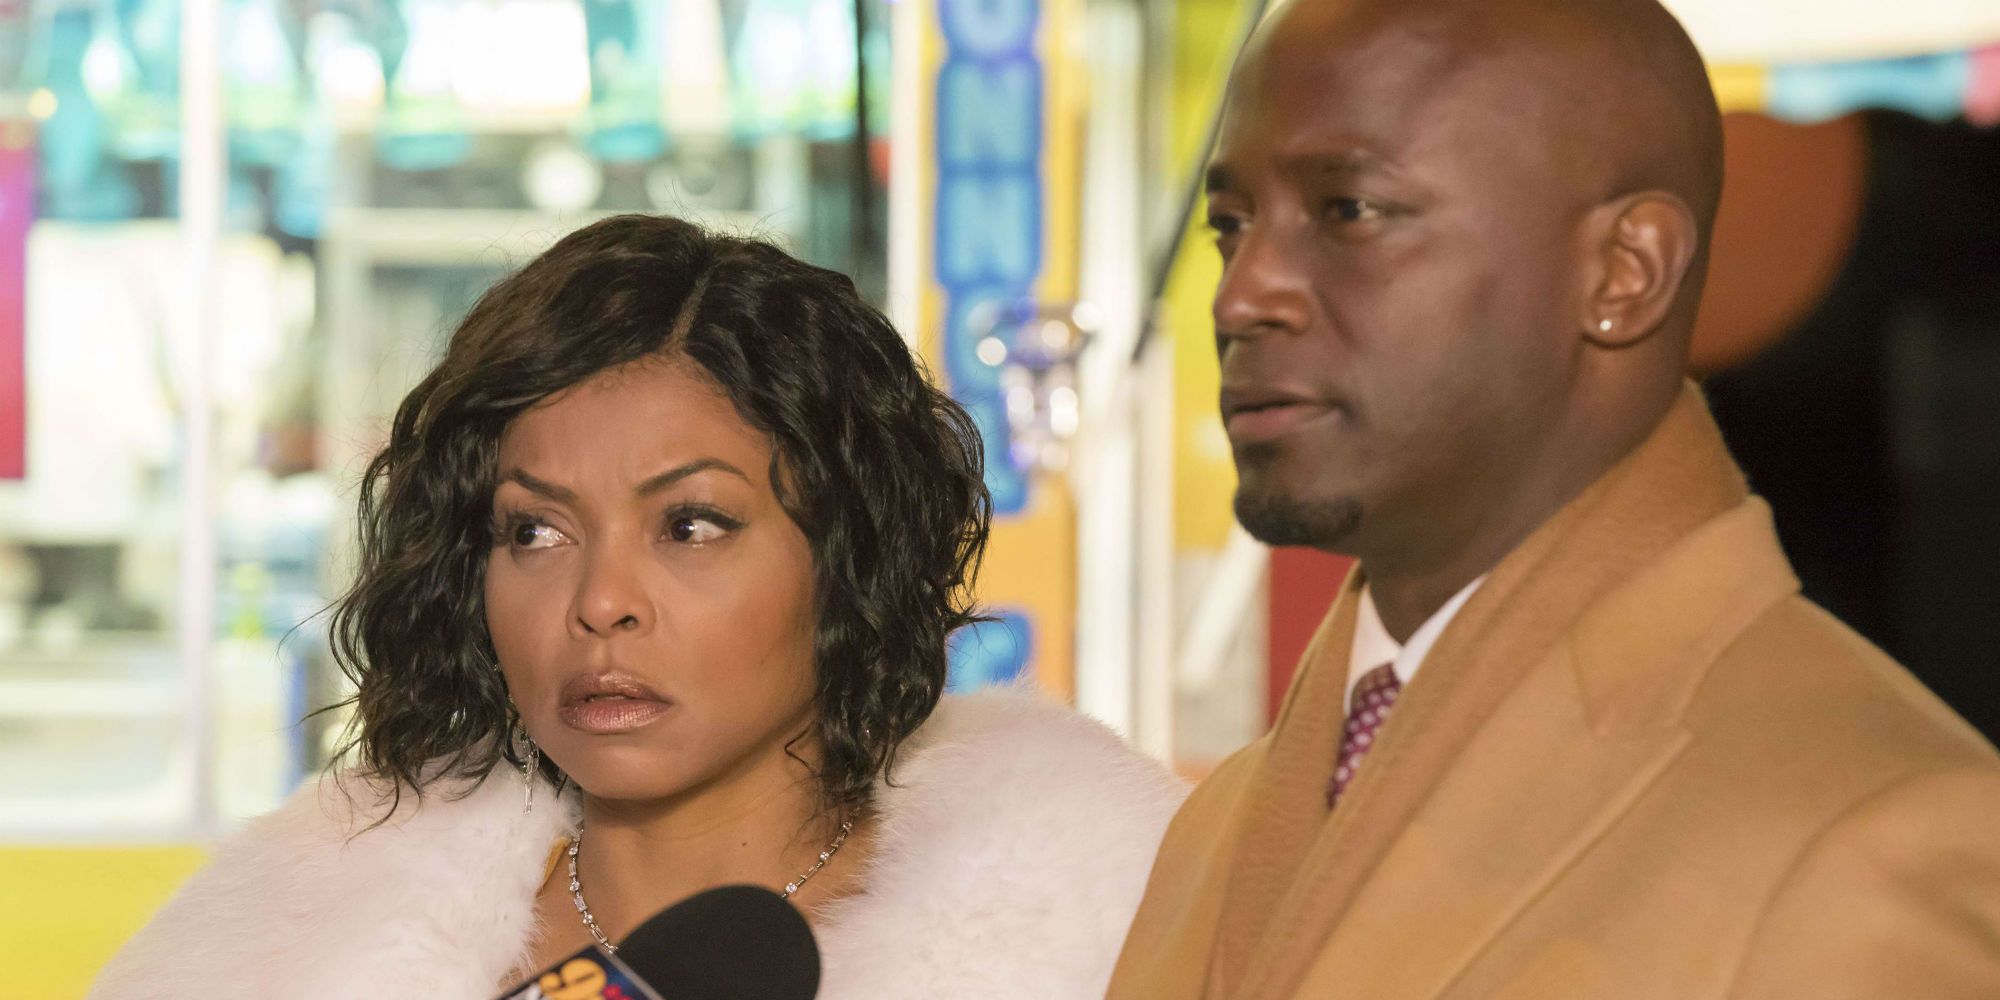 Taraji P Henson standing alongside Taye Diggs, who has a microphone pointed at him, on Empire